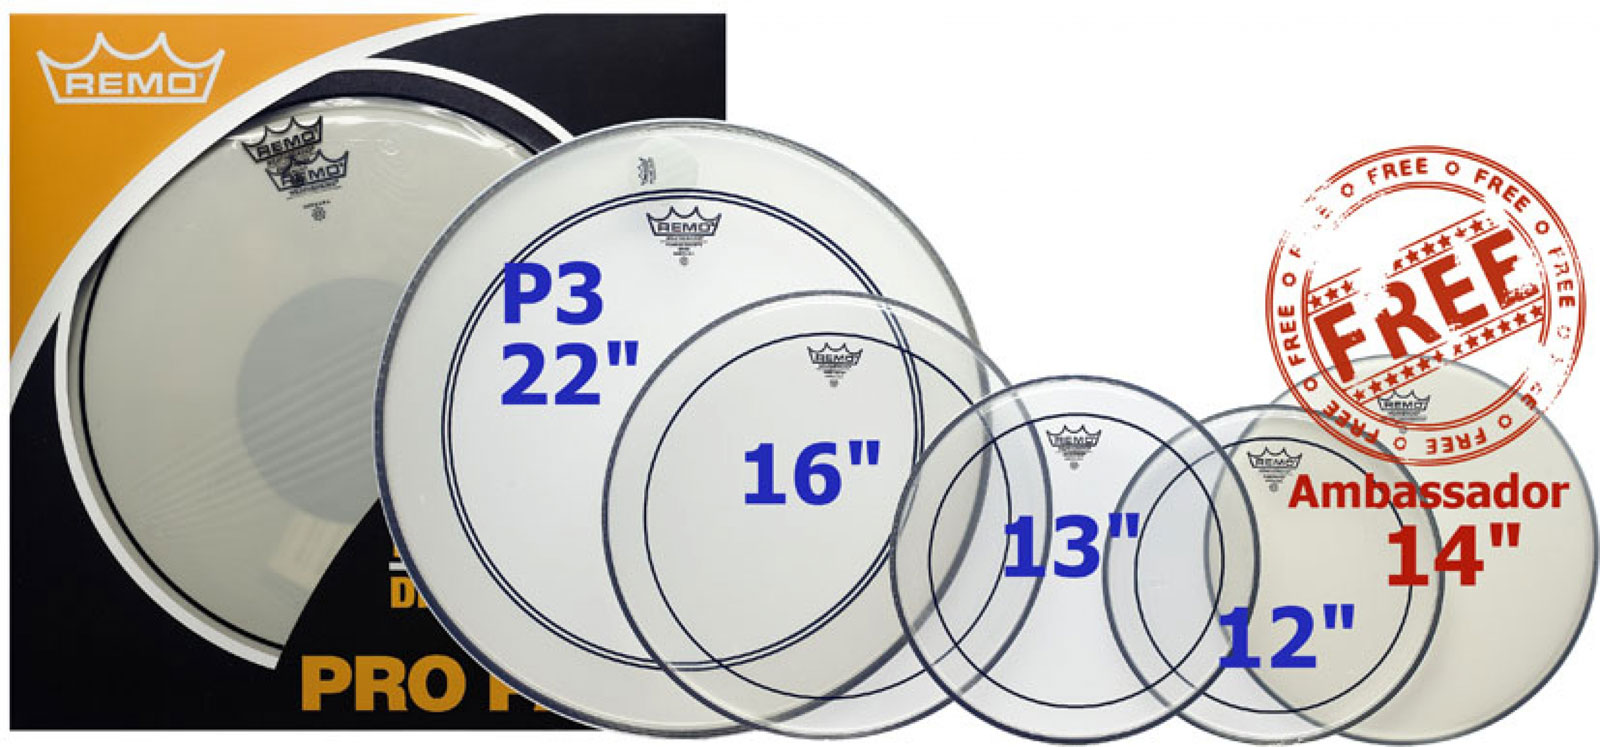 REMO PP-0270-PS - PROPACK PINSTRIPE CLEAR 12/13/16 + POWERSTROKE 3 22 + AMBASSADOR 14 